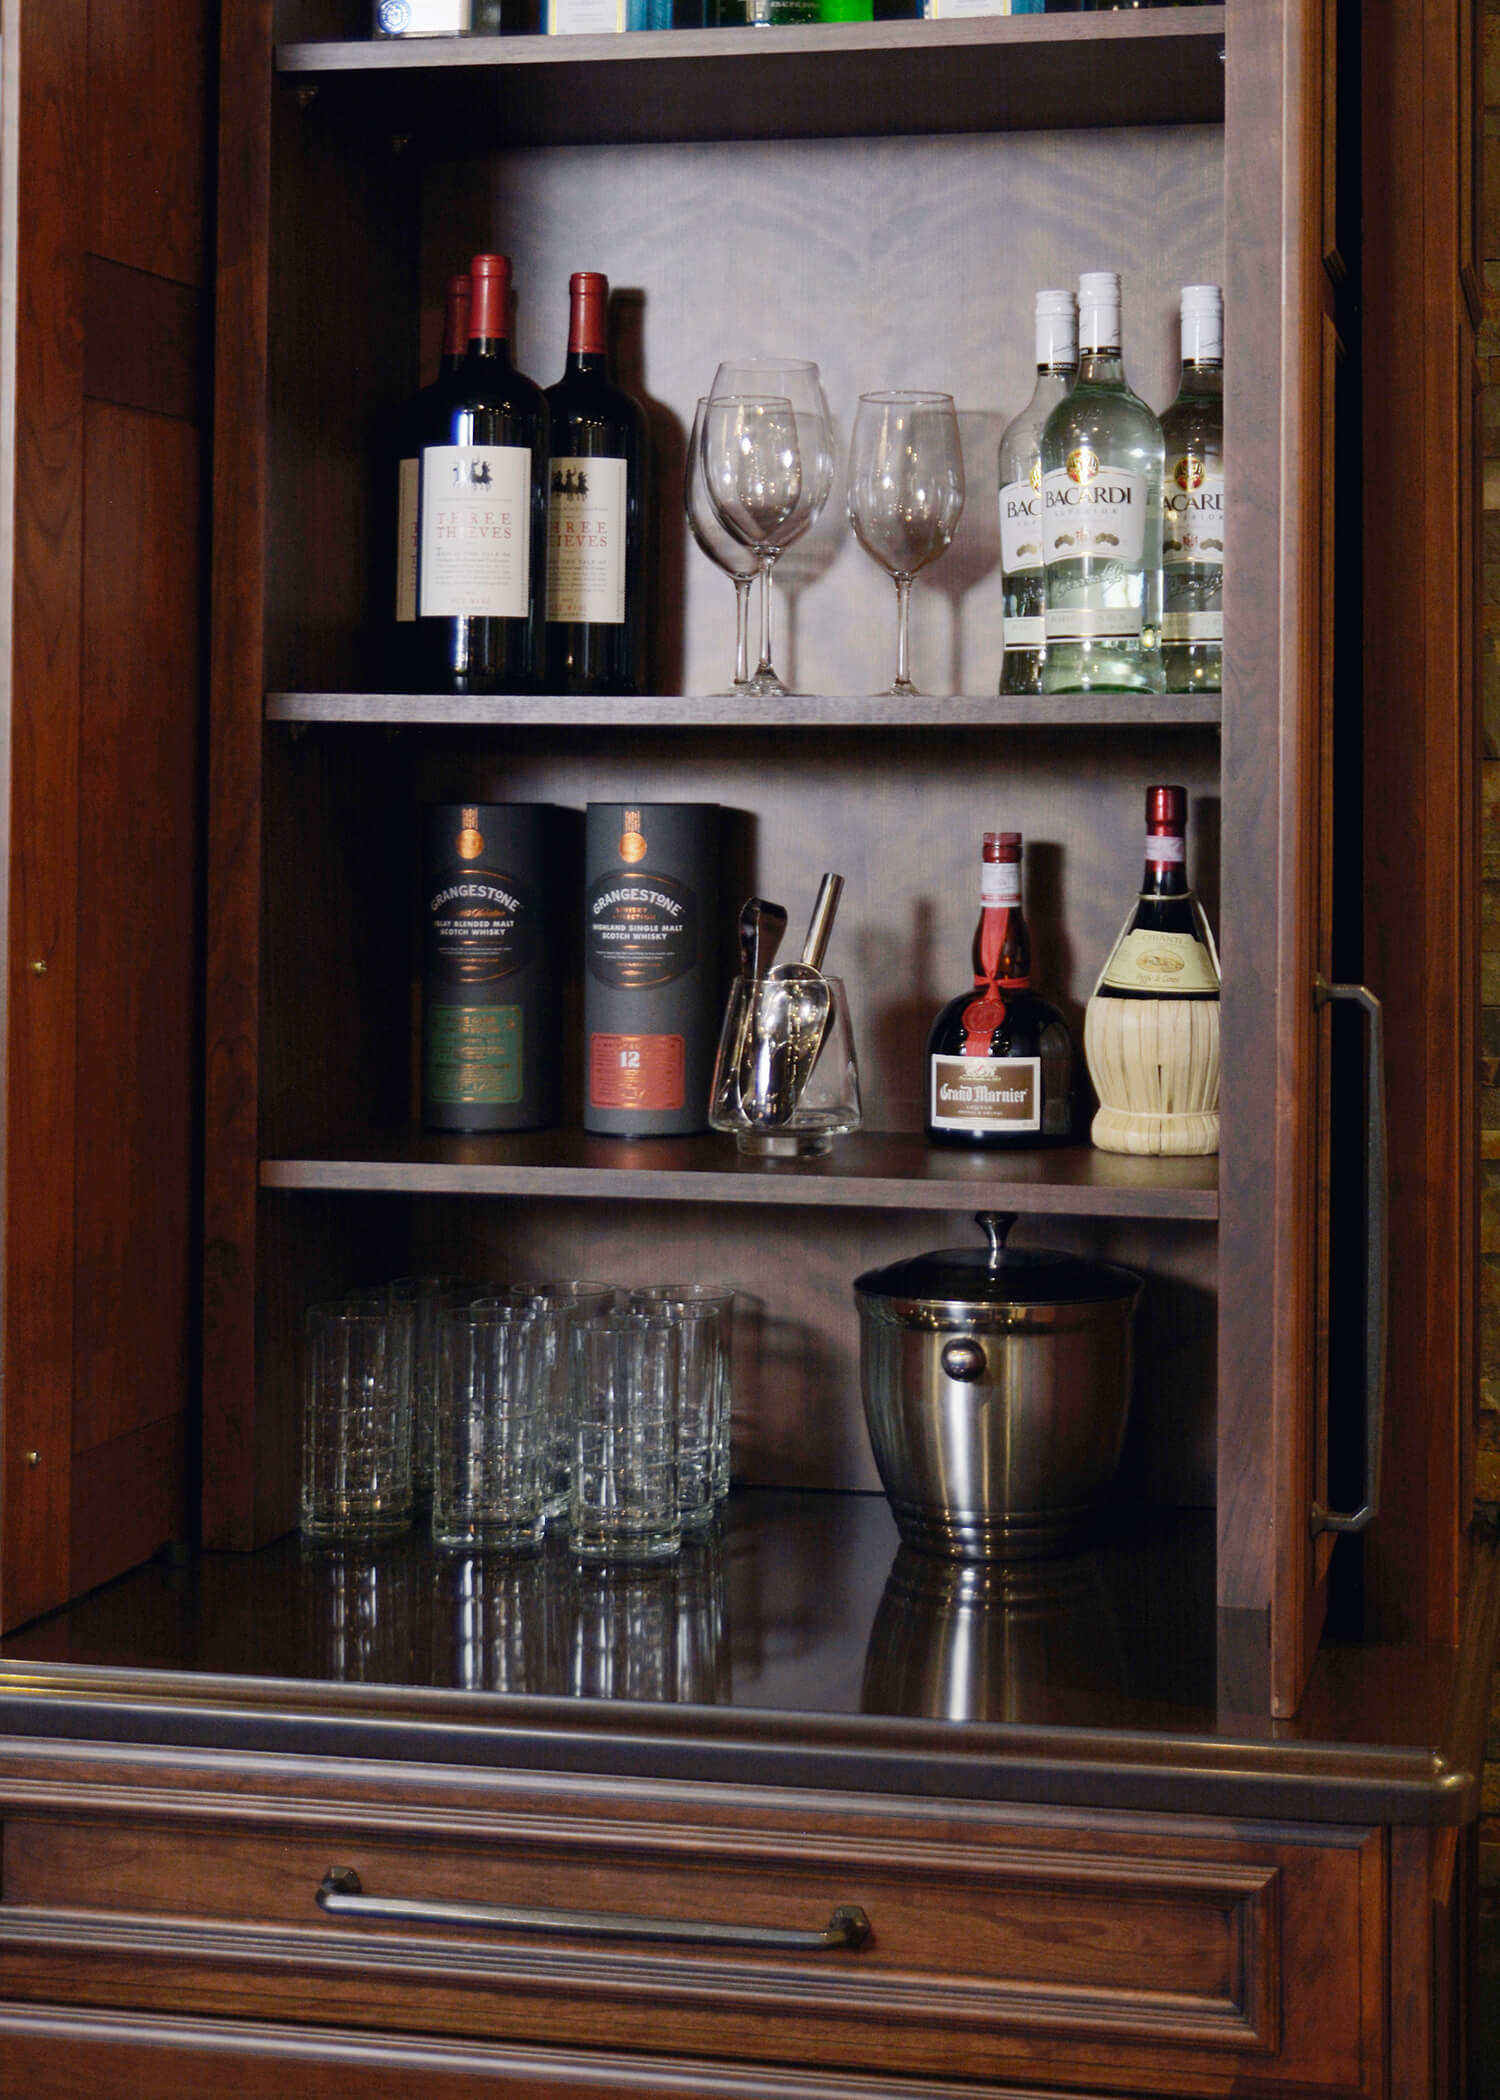 Cabinet pocket doors in a home entertainment center that hide a home bar workstation.